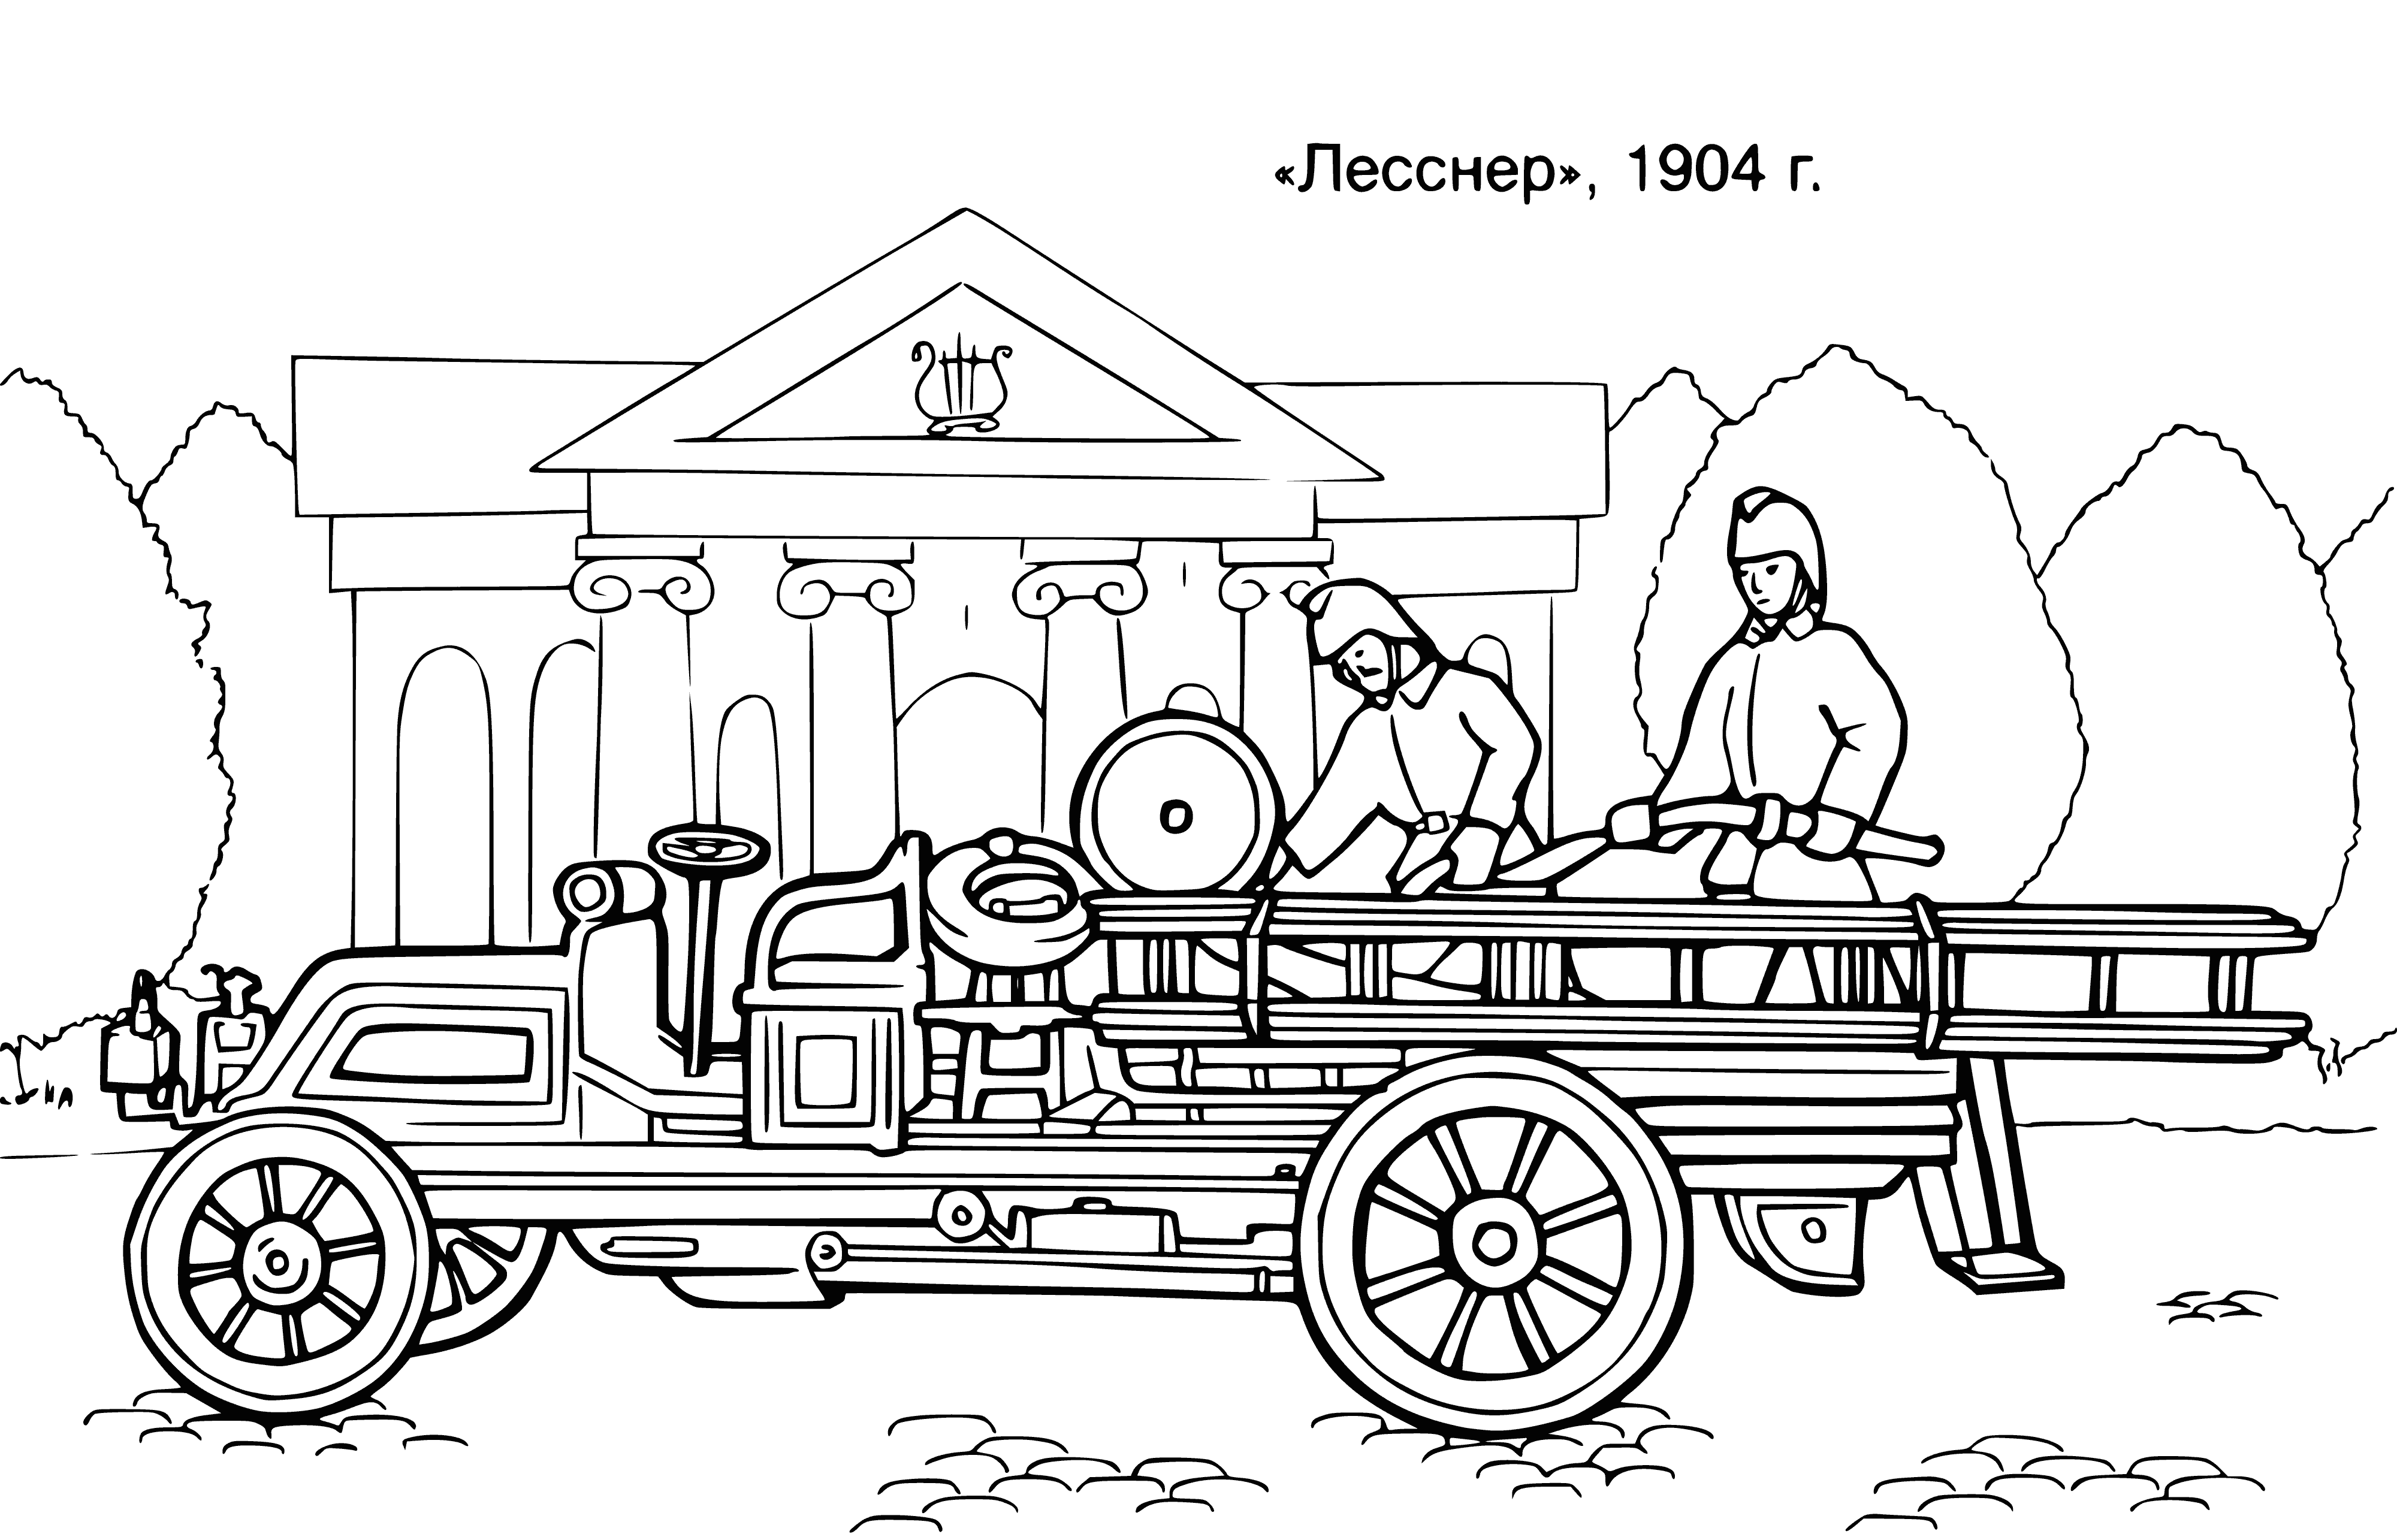 coloring page: Coloring page with fire truck, firefighter in uniform, ladders, and "FIRE" written on side. Great for learning & fun! #coloring #firetruck